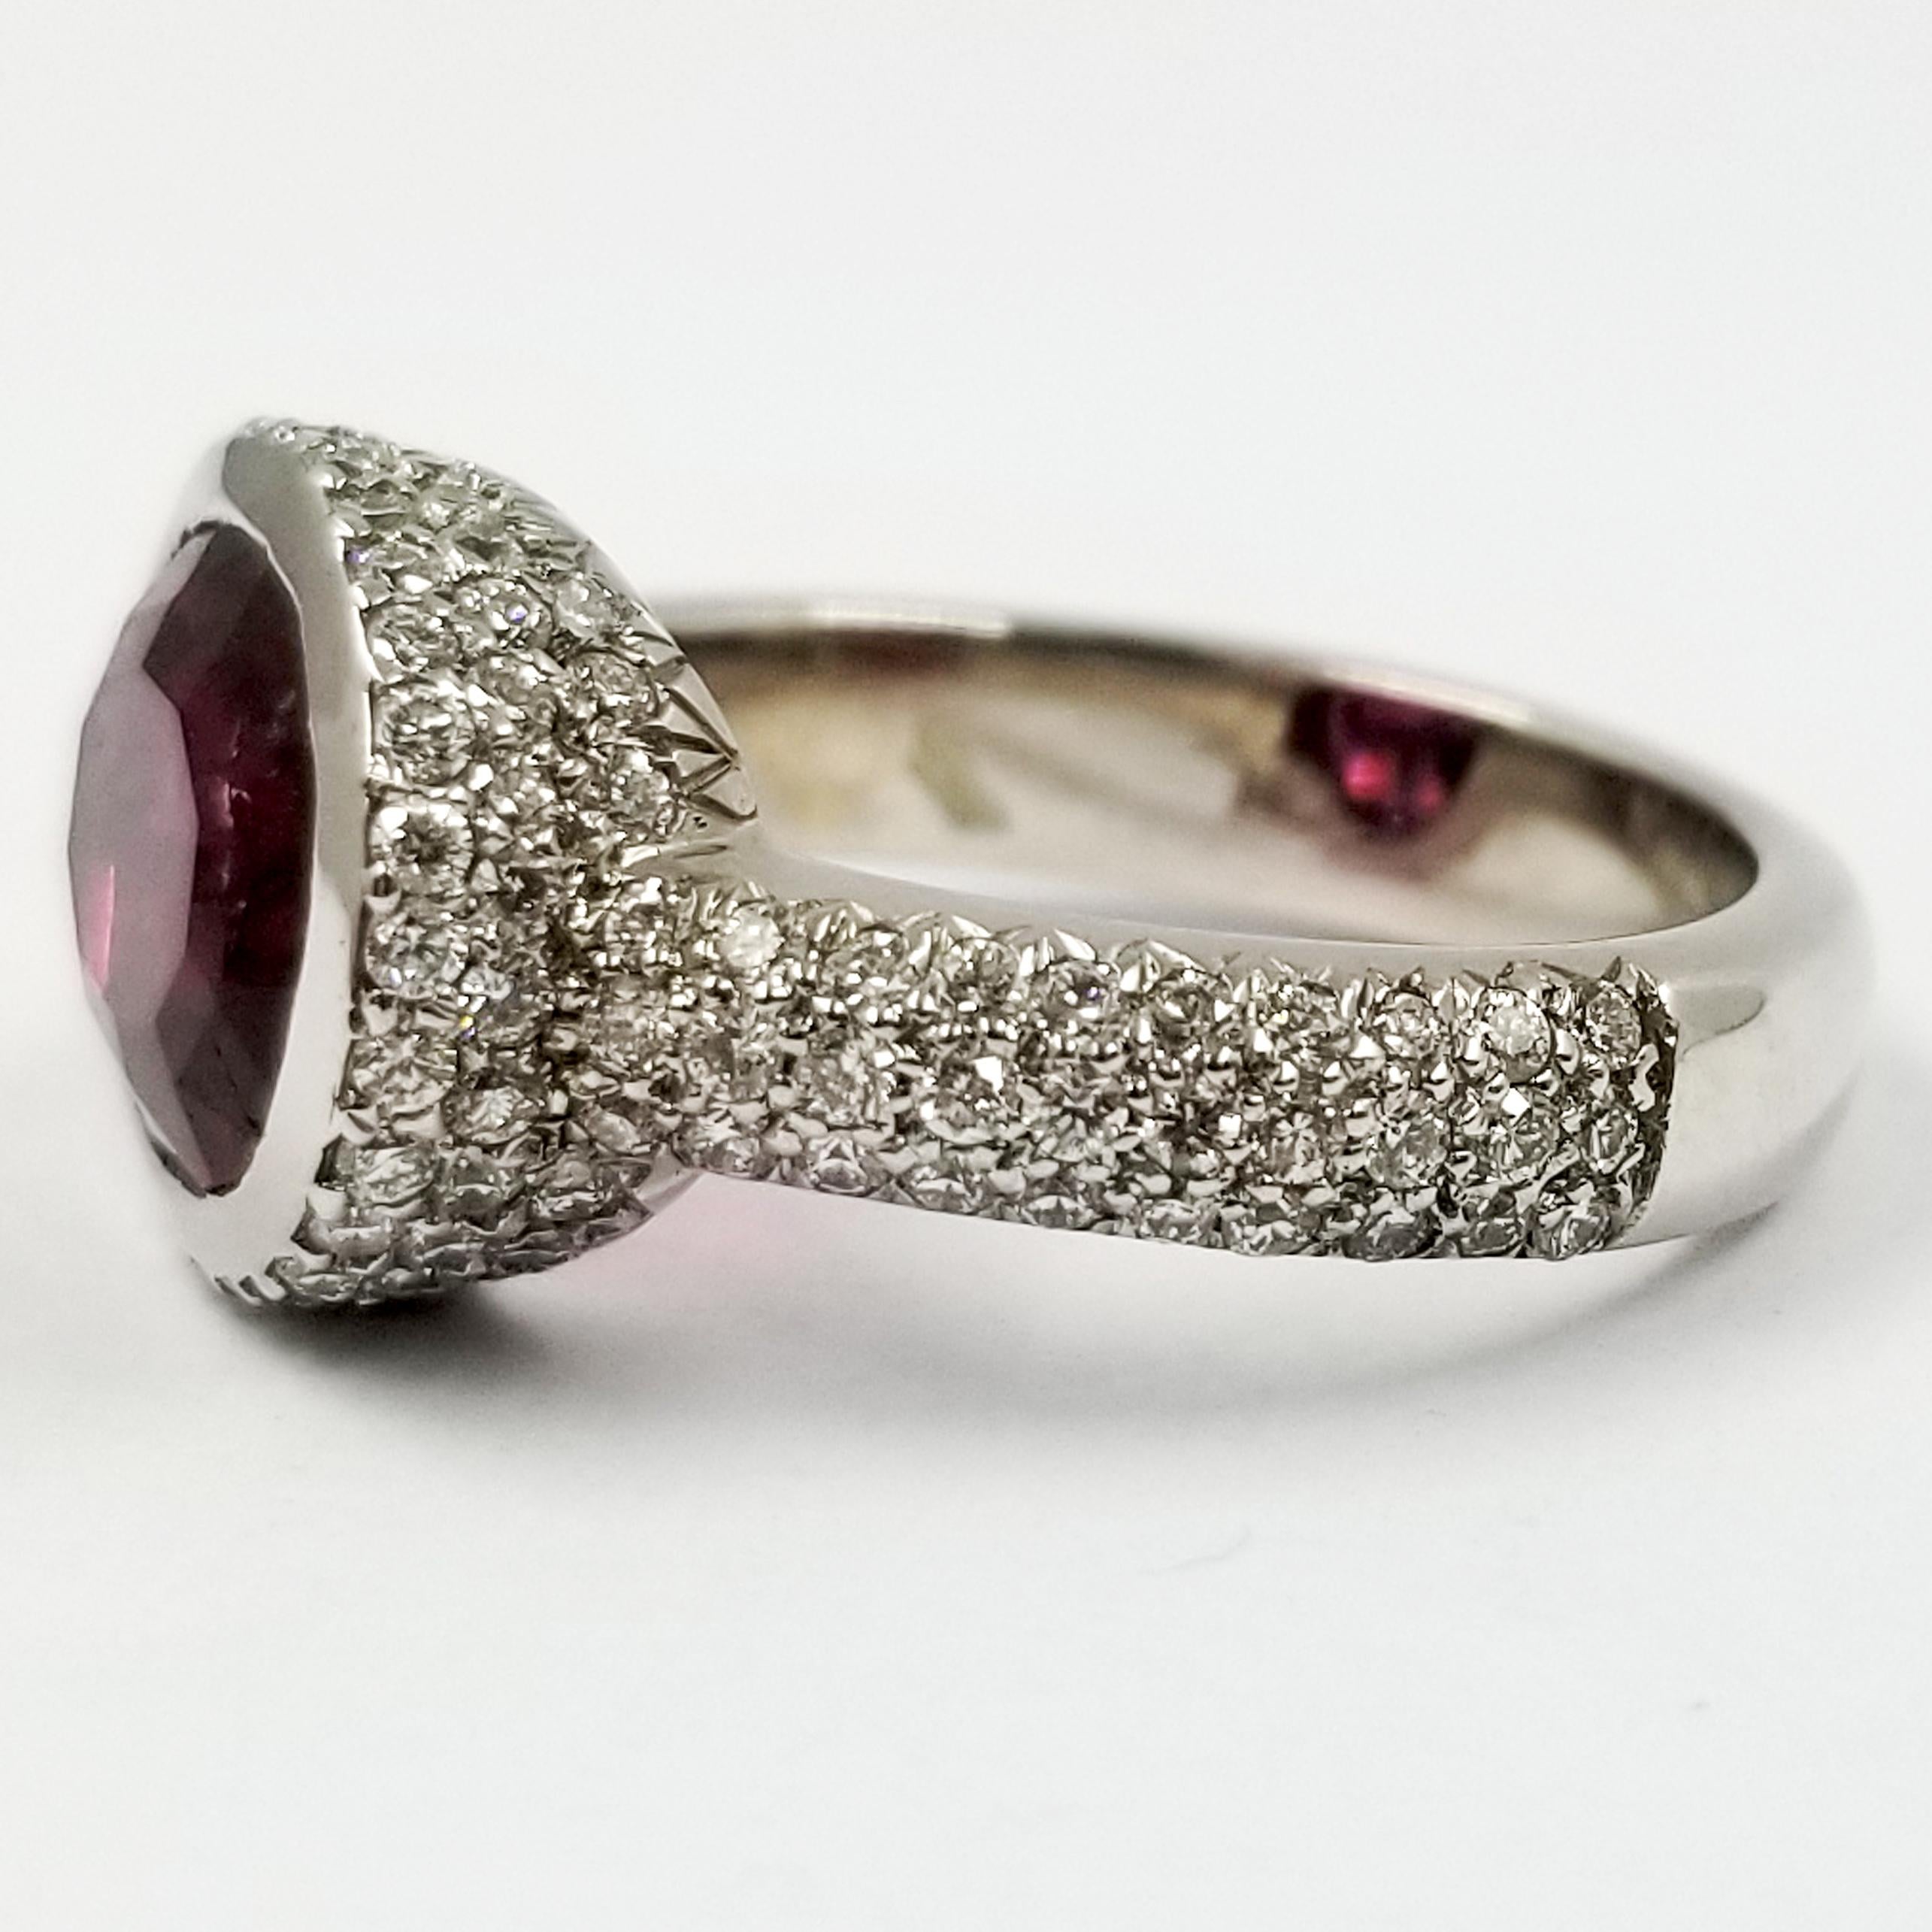 18 Karat White Gold Ring Featuring A Bezel Set Oval Cut Pink Tourmaline Weighing Exactly 3.05 Carats. The Tourmaline Center Stone Has Eye Visible Natural Inclusions. It Is Surrounded By 128 Pave Set Round Diamonds Of VS Clarity & G Color Totaling